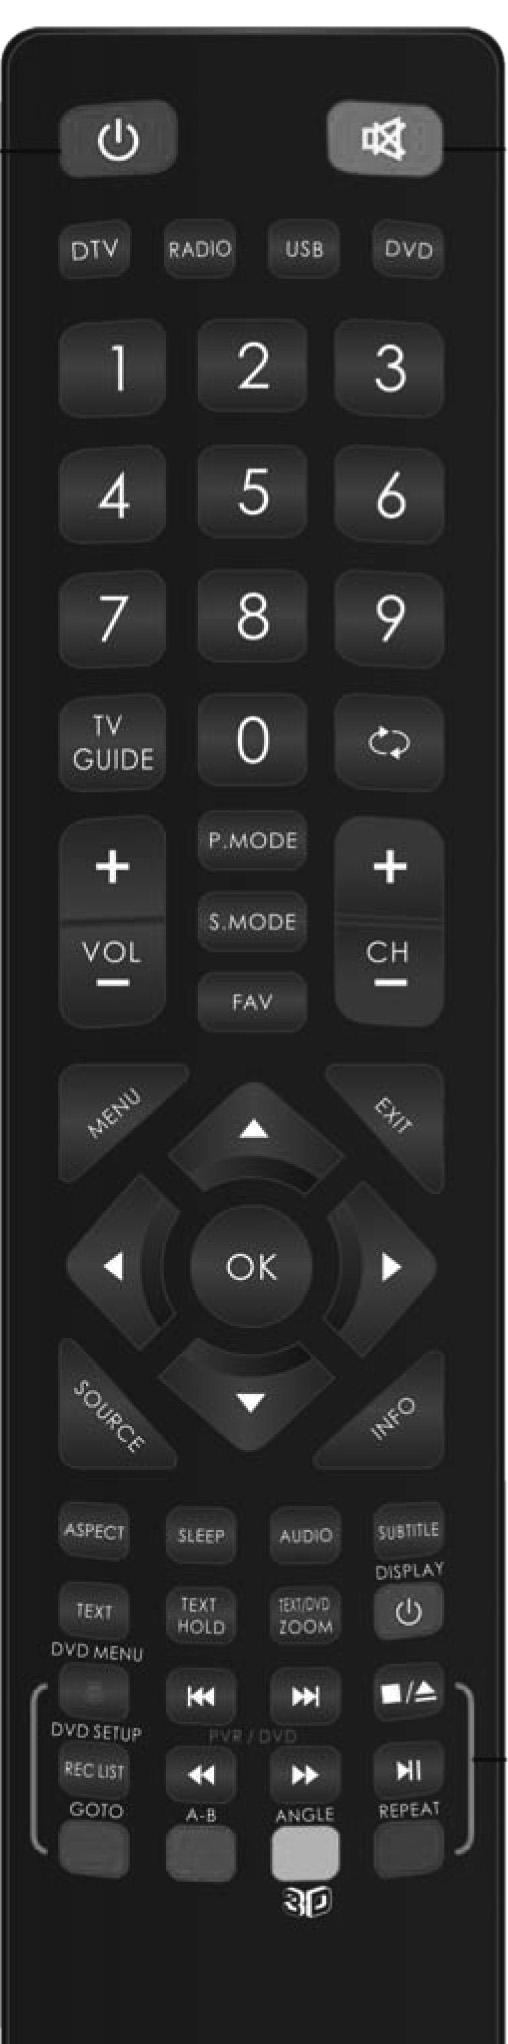 Remote Control REMOTE CONTROL 1 2 3 4 STANDBY - Switch on TV when in standby or vice versa MUTE - Mute the sound or vice versa DTV - Switch to digital mode RADIO - Switch to radio whilst in digital